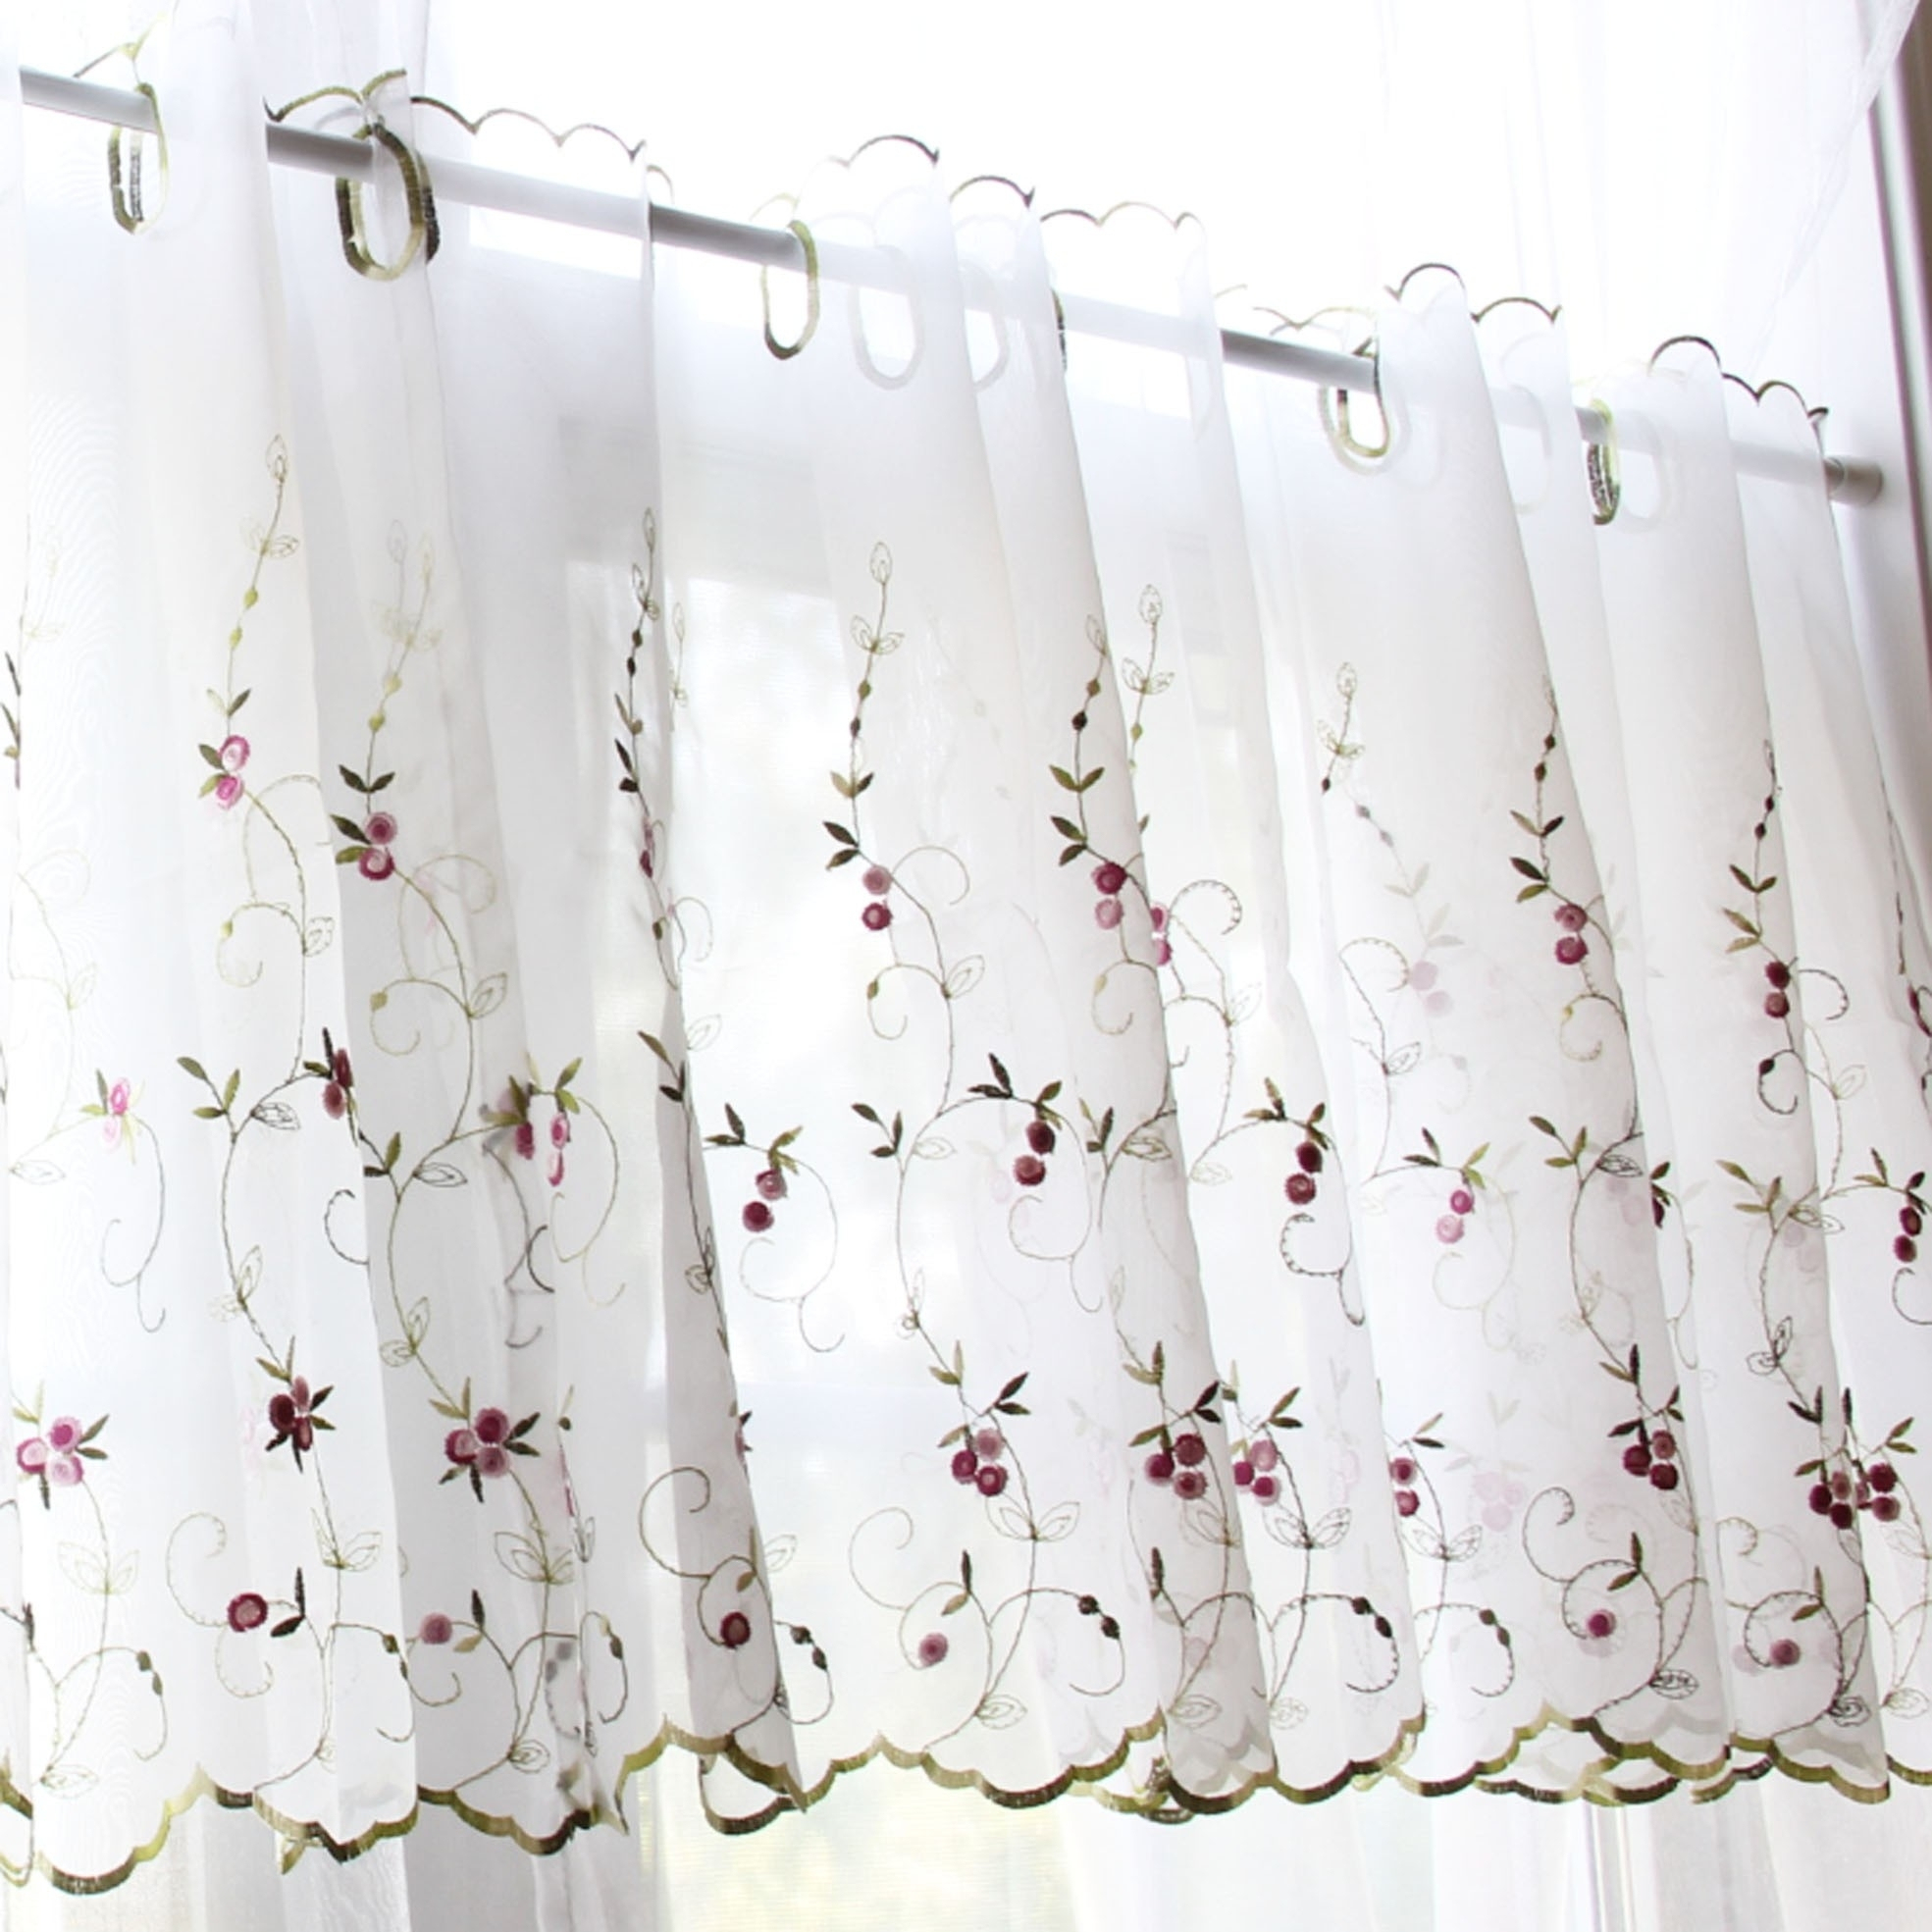 Cottage Victorian Shower Curtain - Ideas On Foter pour Shabby Chic Curtains 